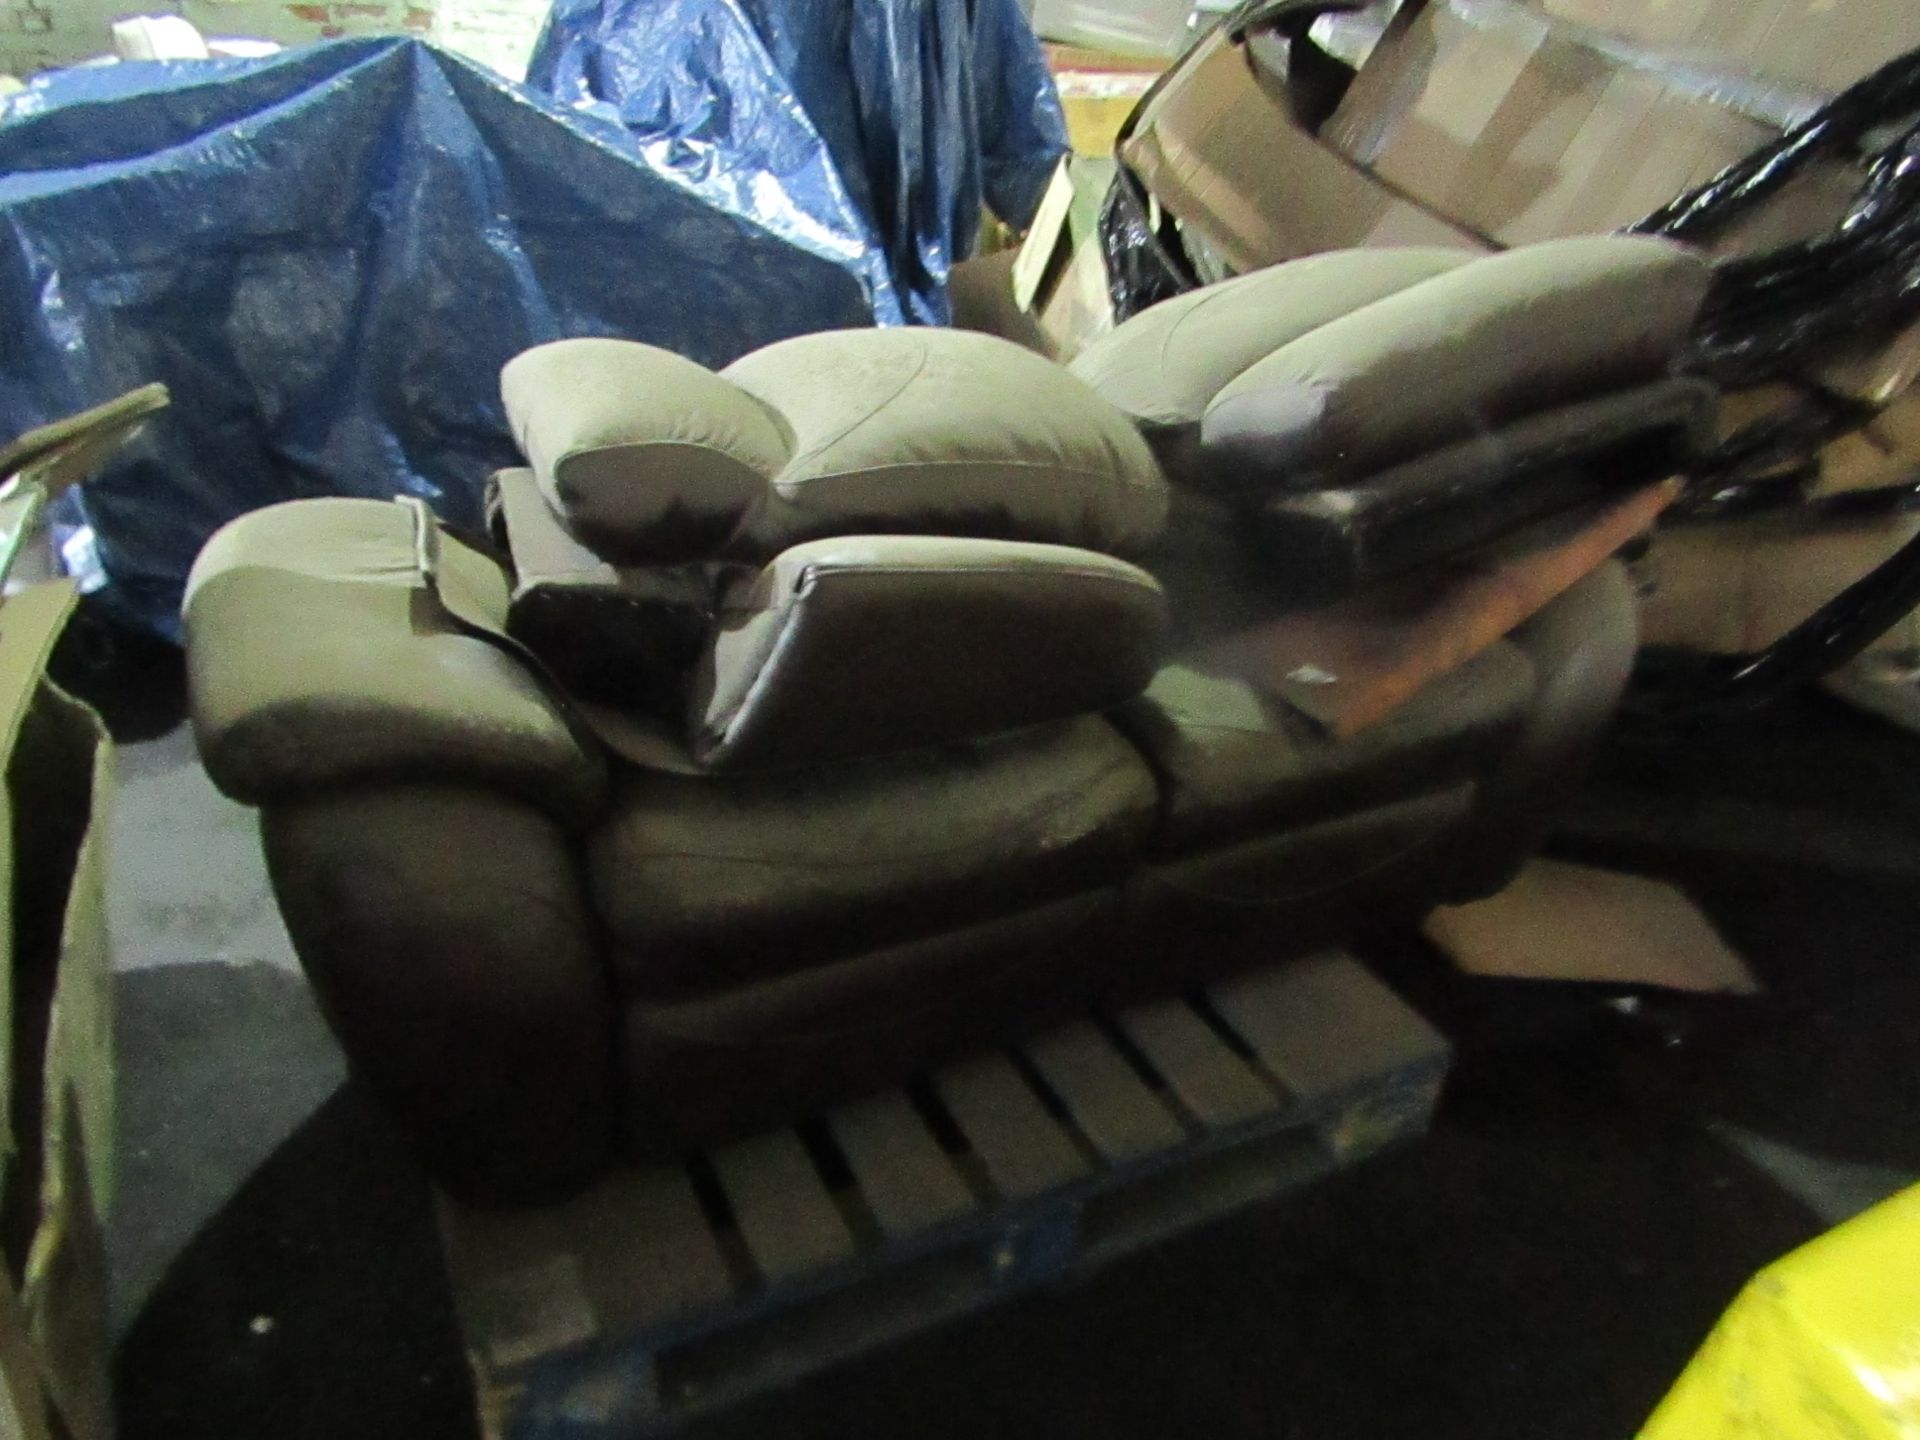 Pallet containg a Costco return 2 seater leather sofa/. This has been stored for a couple of years